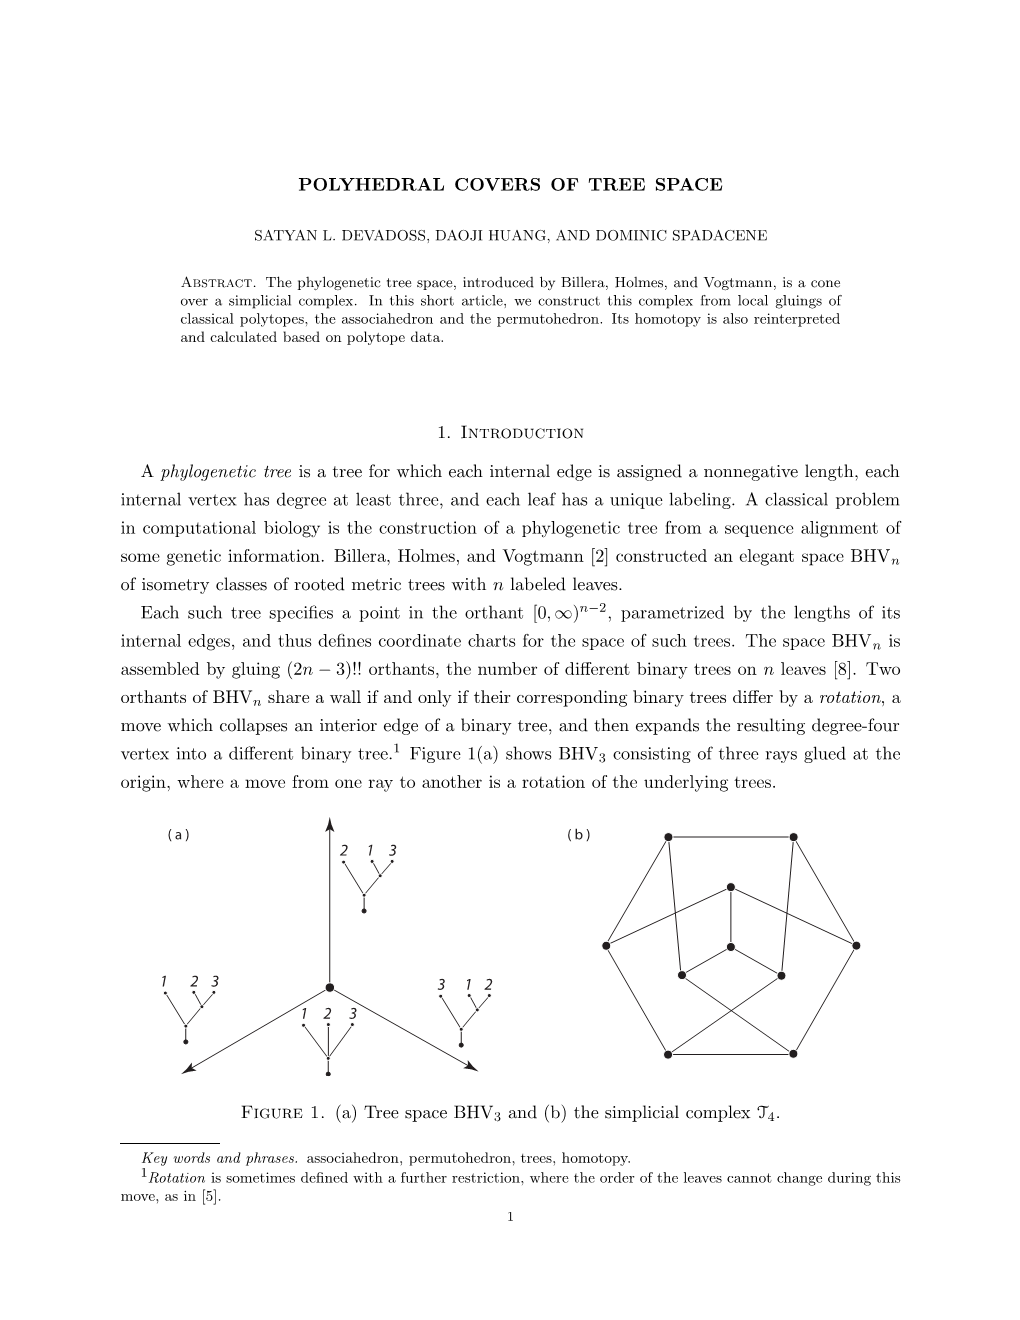 POLYHEDRAL COVERS of TREE SPACE 1. Introduction A